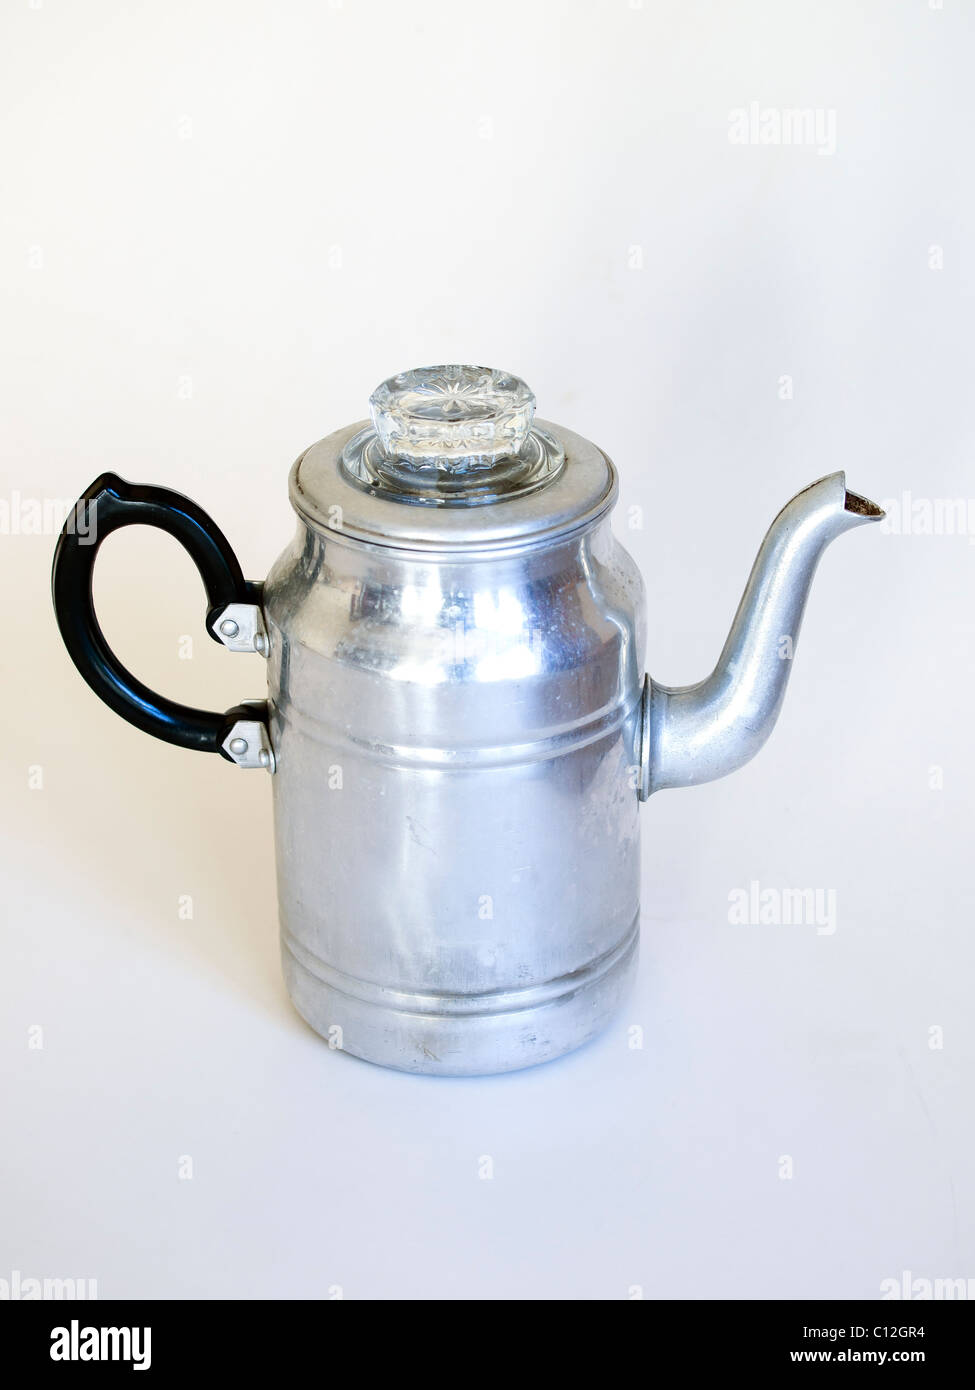 An old aluminium coffee percolator as used in the 1940's 1950's on a white background Stock Photo